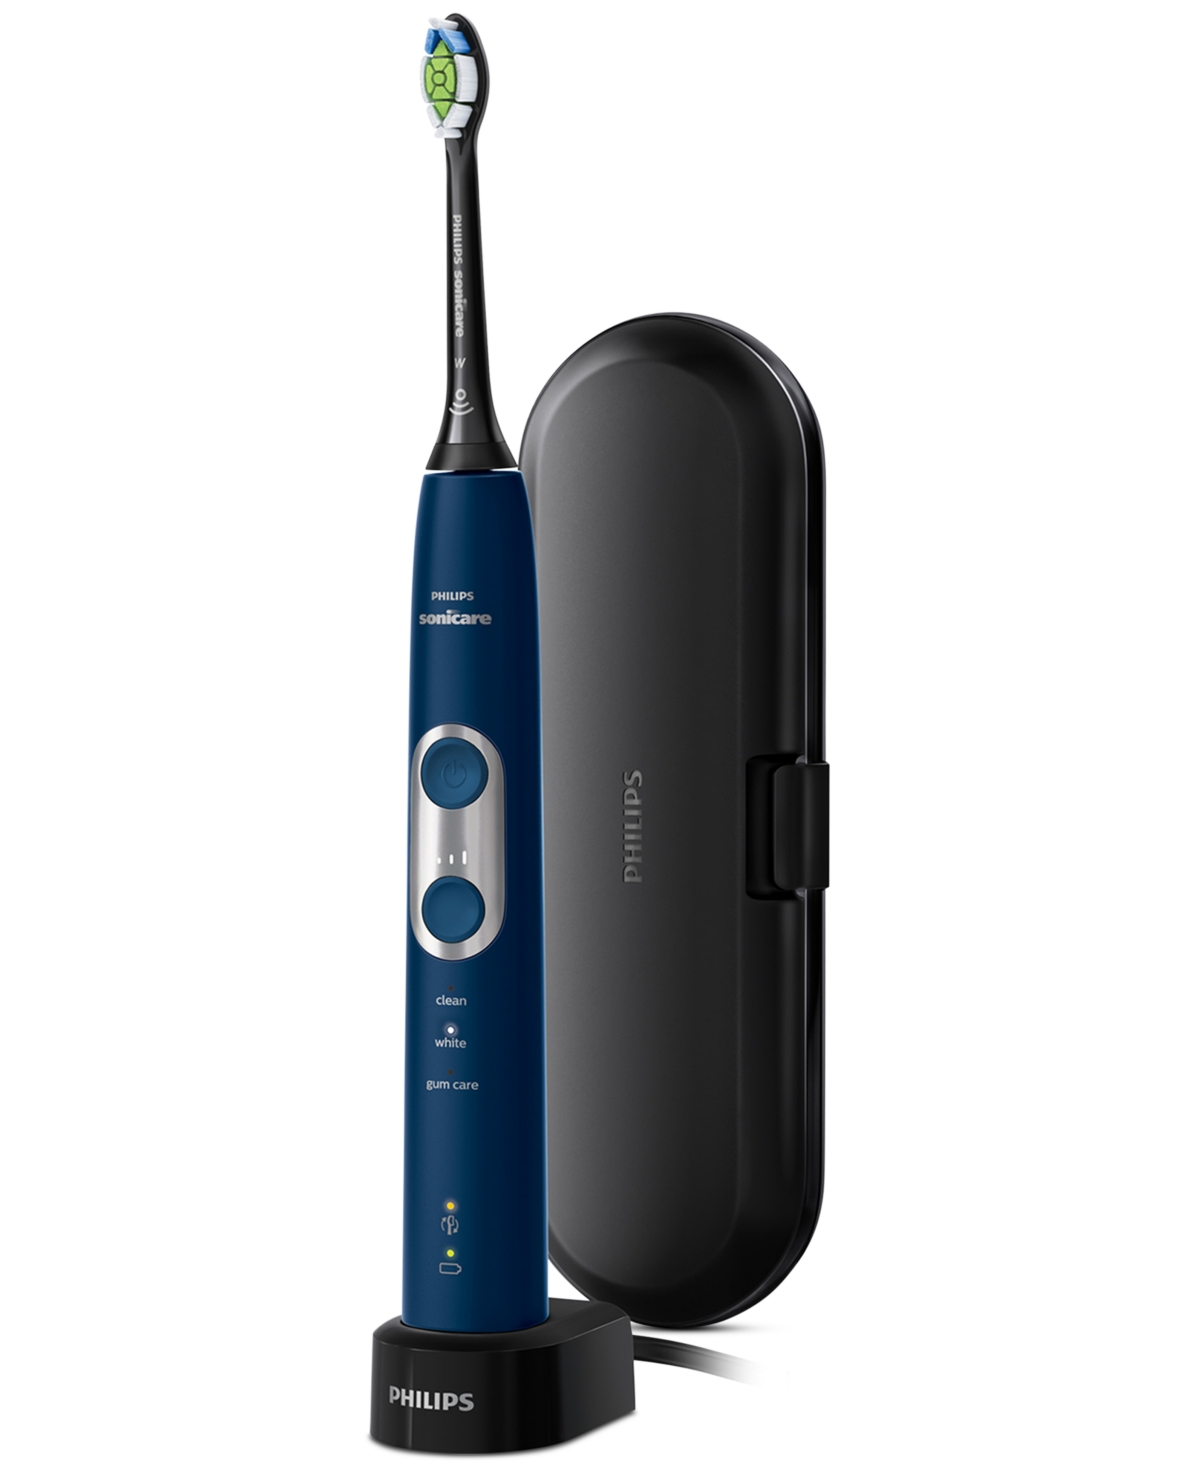 Philips Sonicare 6100 Series Cordless Electric Tooth Brush In Navy